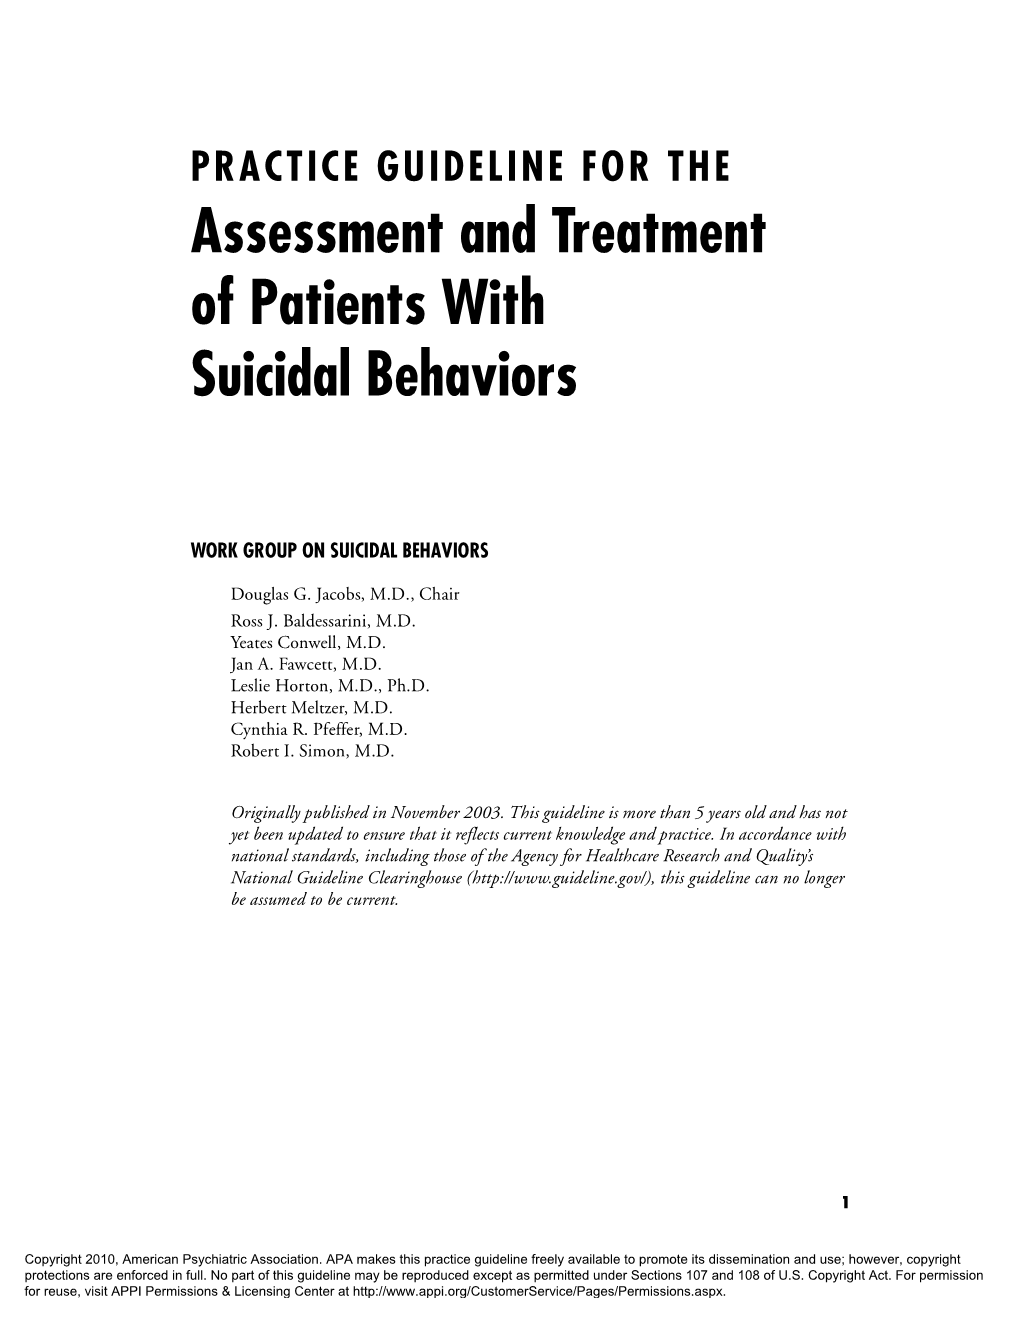 Assessment and Treatment of Patients with Suicidal Behaviors